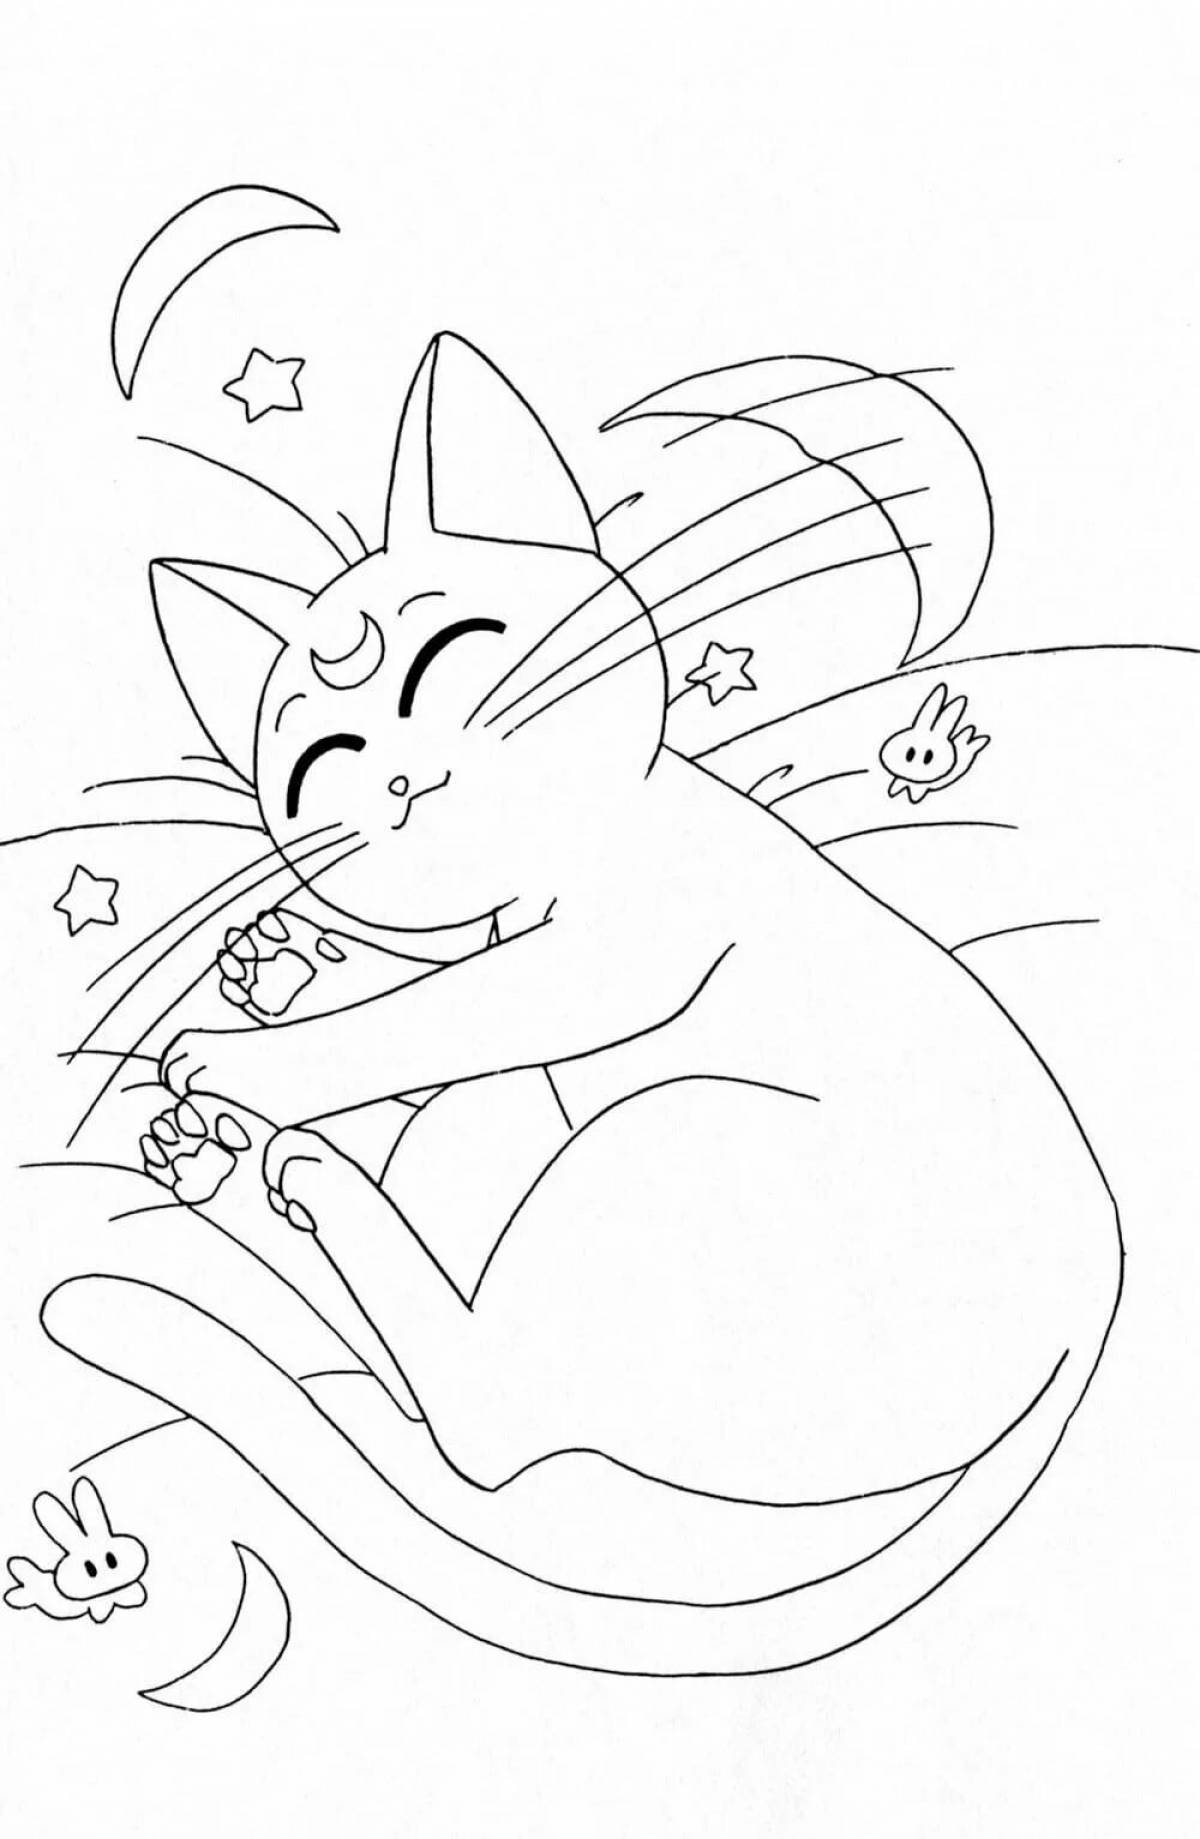 Gorgeous moon cat coloring book